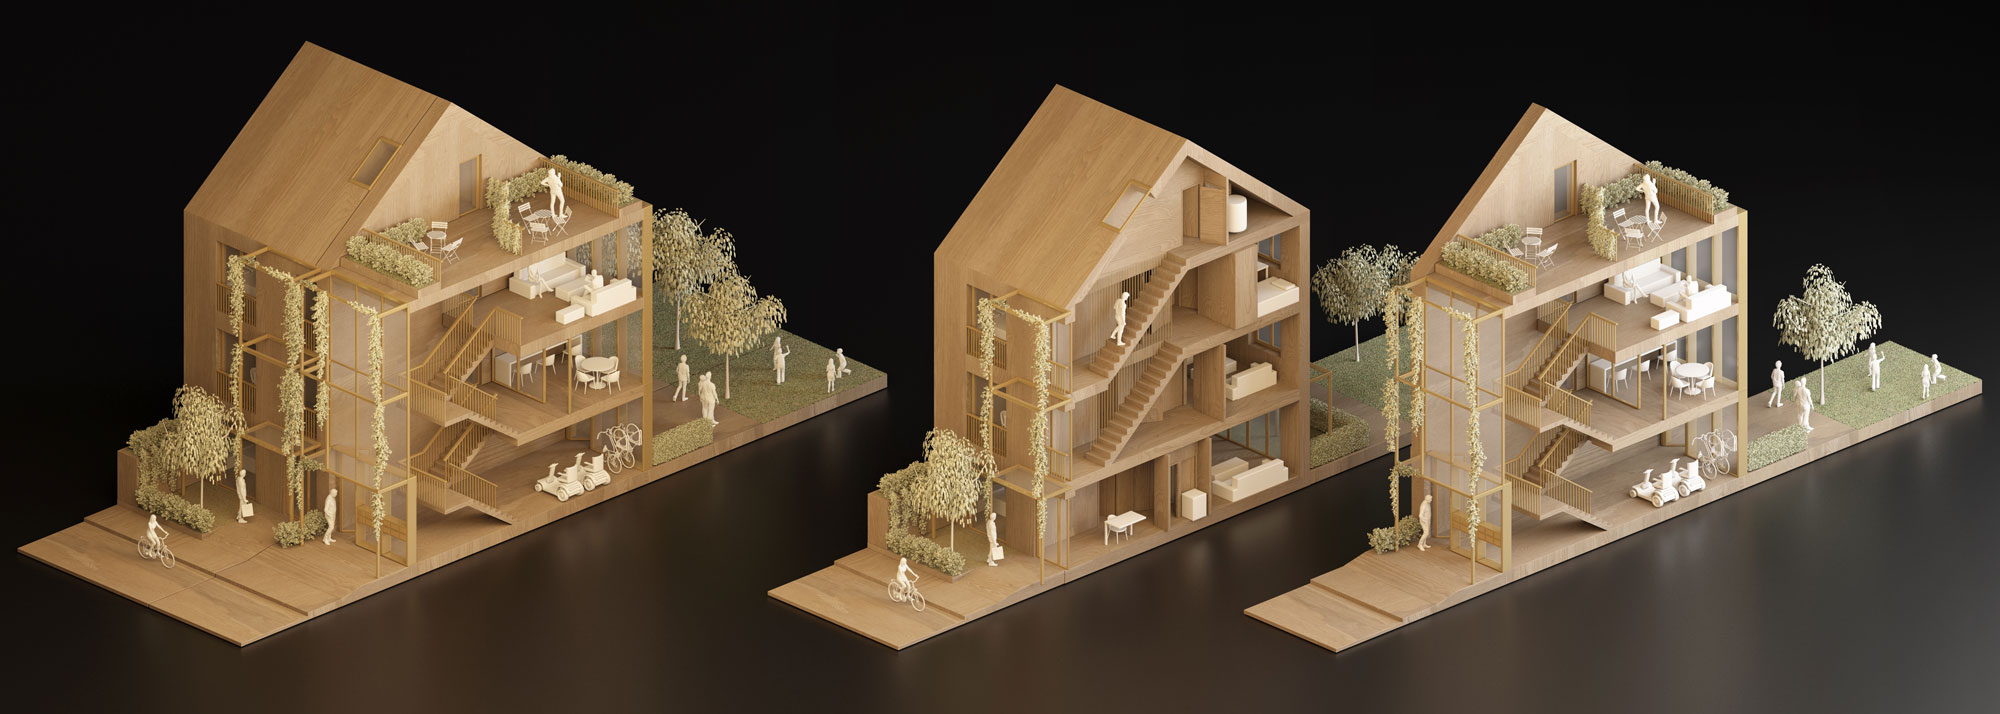 connector-housing-home-of-2030-openstudio-architects-model-section